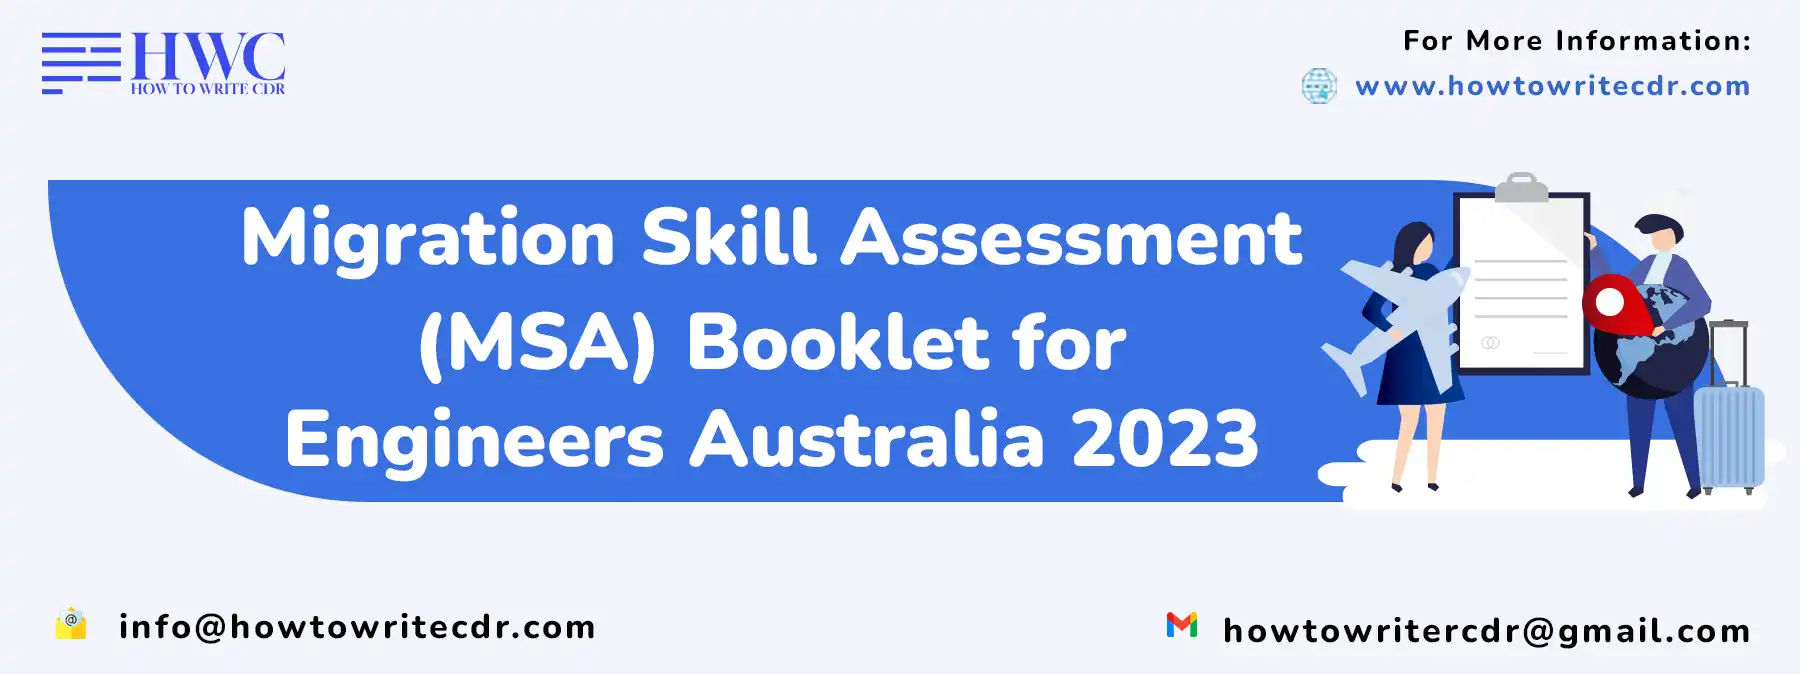 You are currently viewing MIGRATION SKILL ASSESSMENT (MSA) BOOKLET FOR ENGINEERS AUSTRALIA 2023